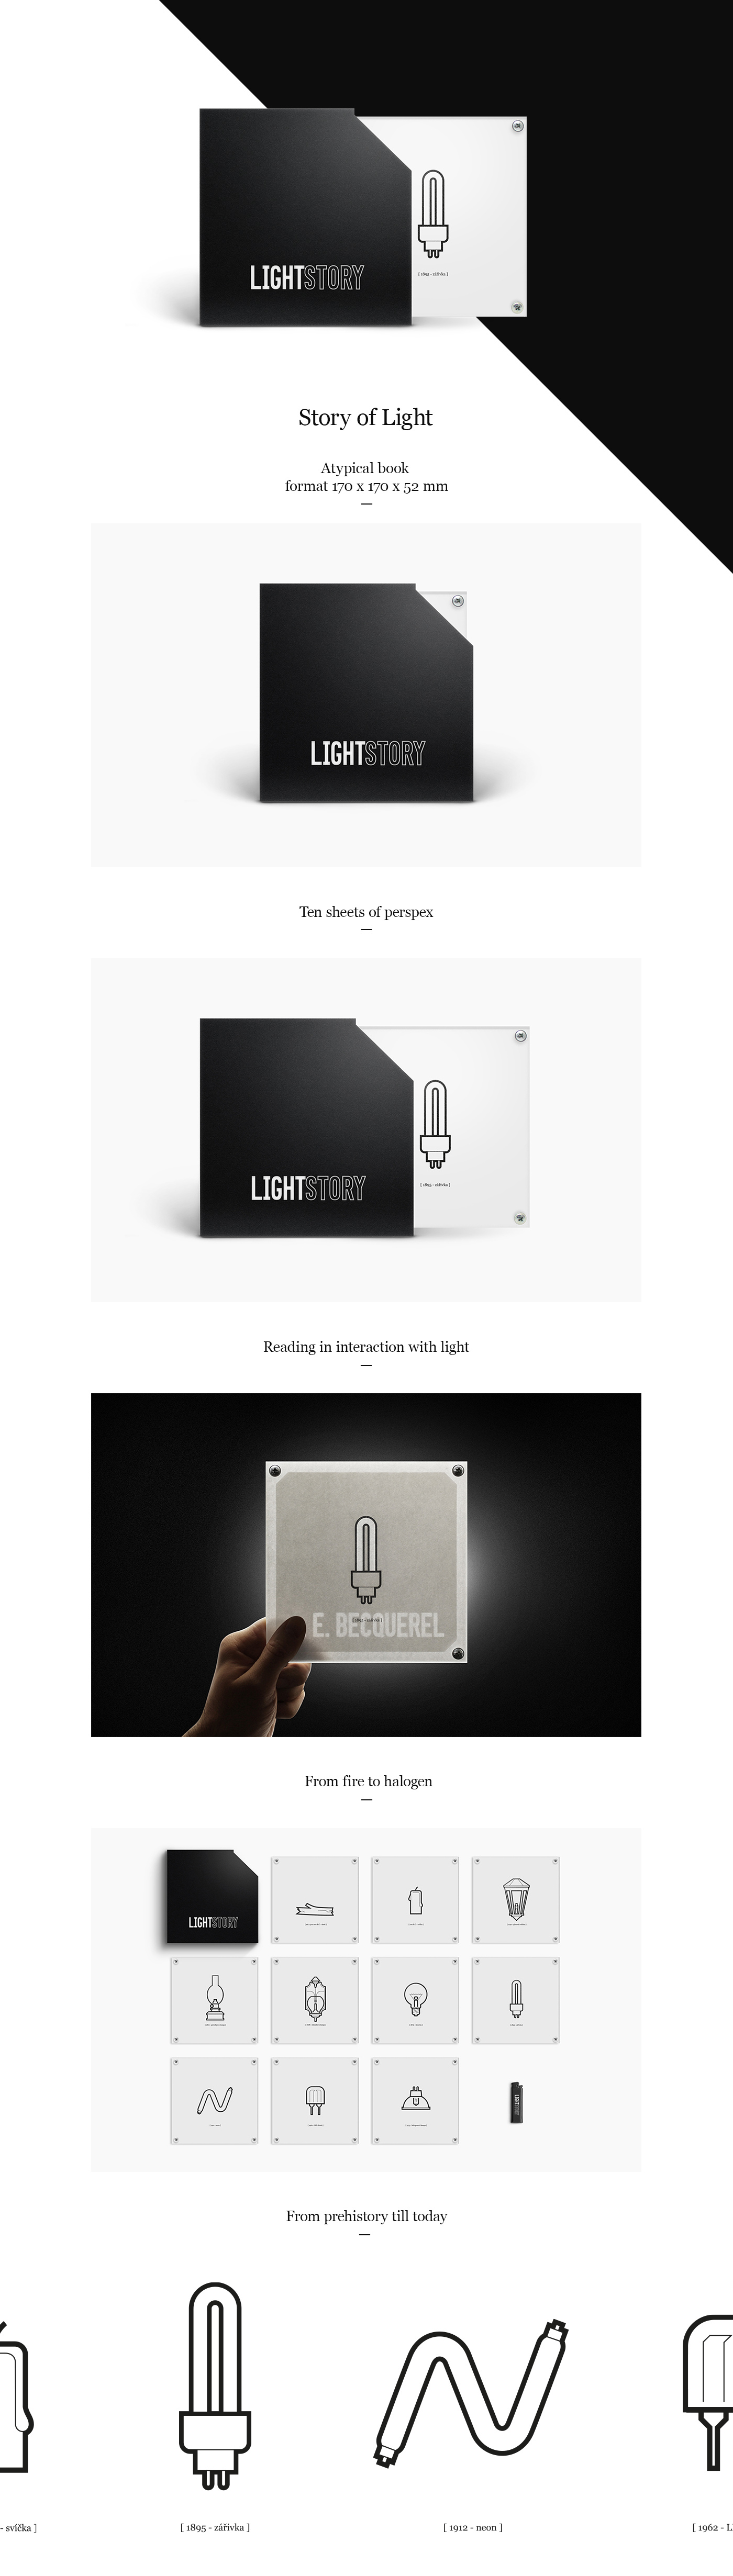 book light story perspex ineractive Atypic bulb halogen invention black and white